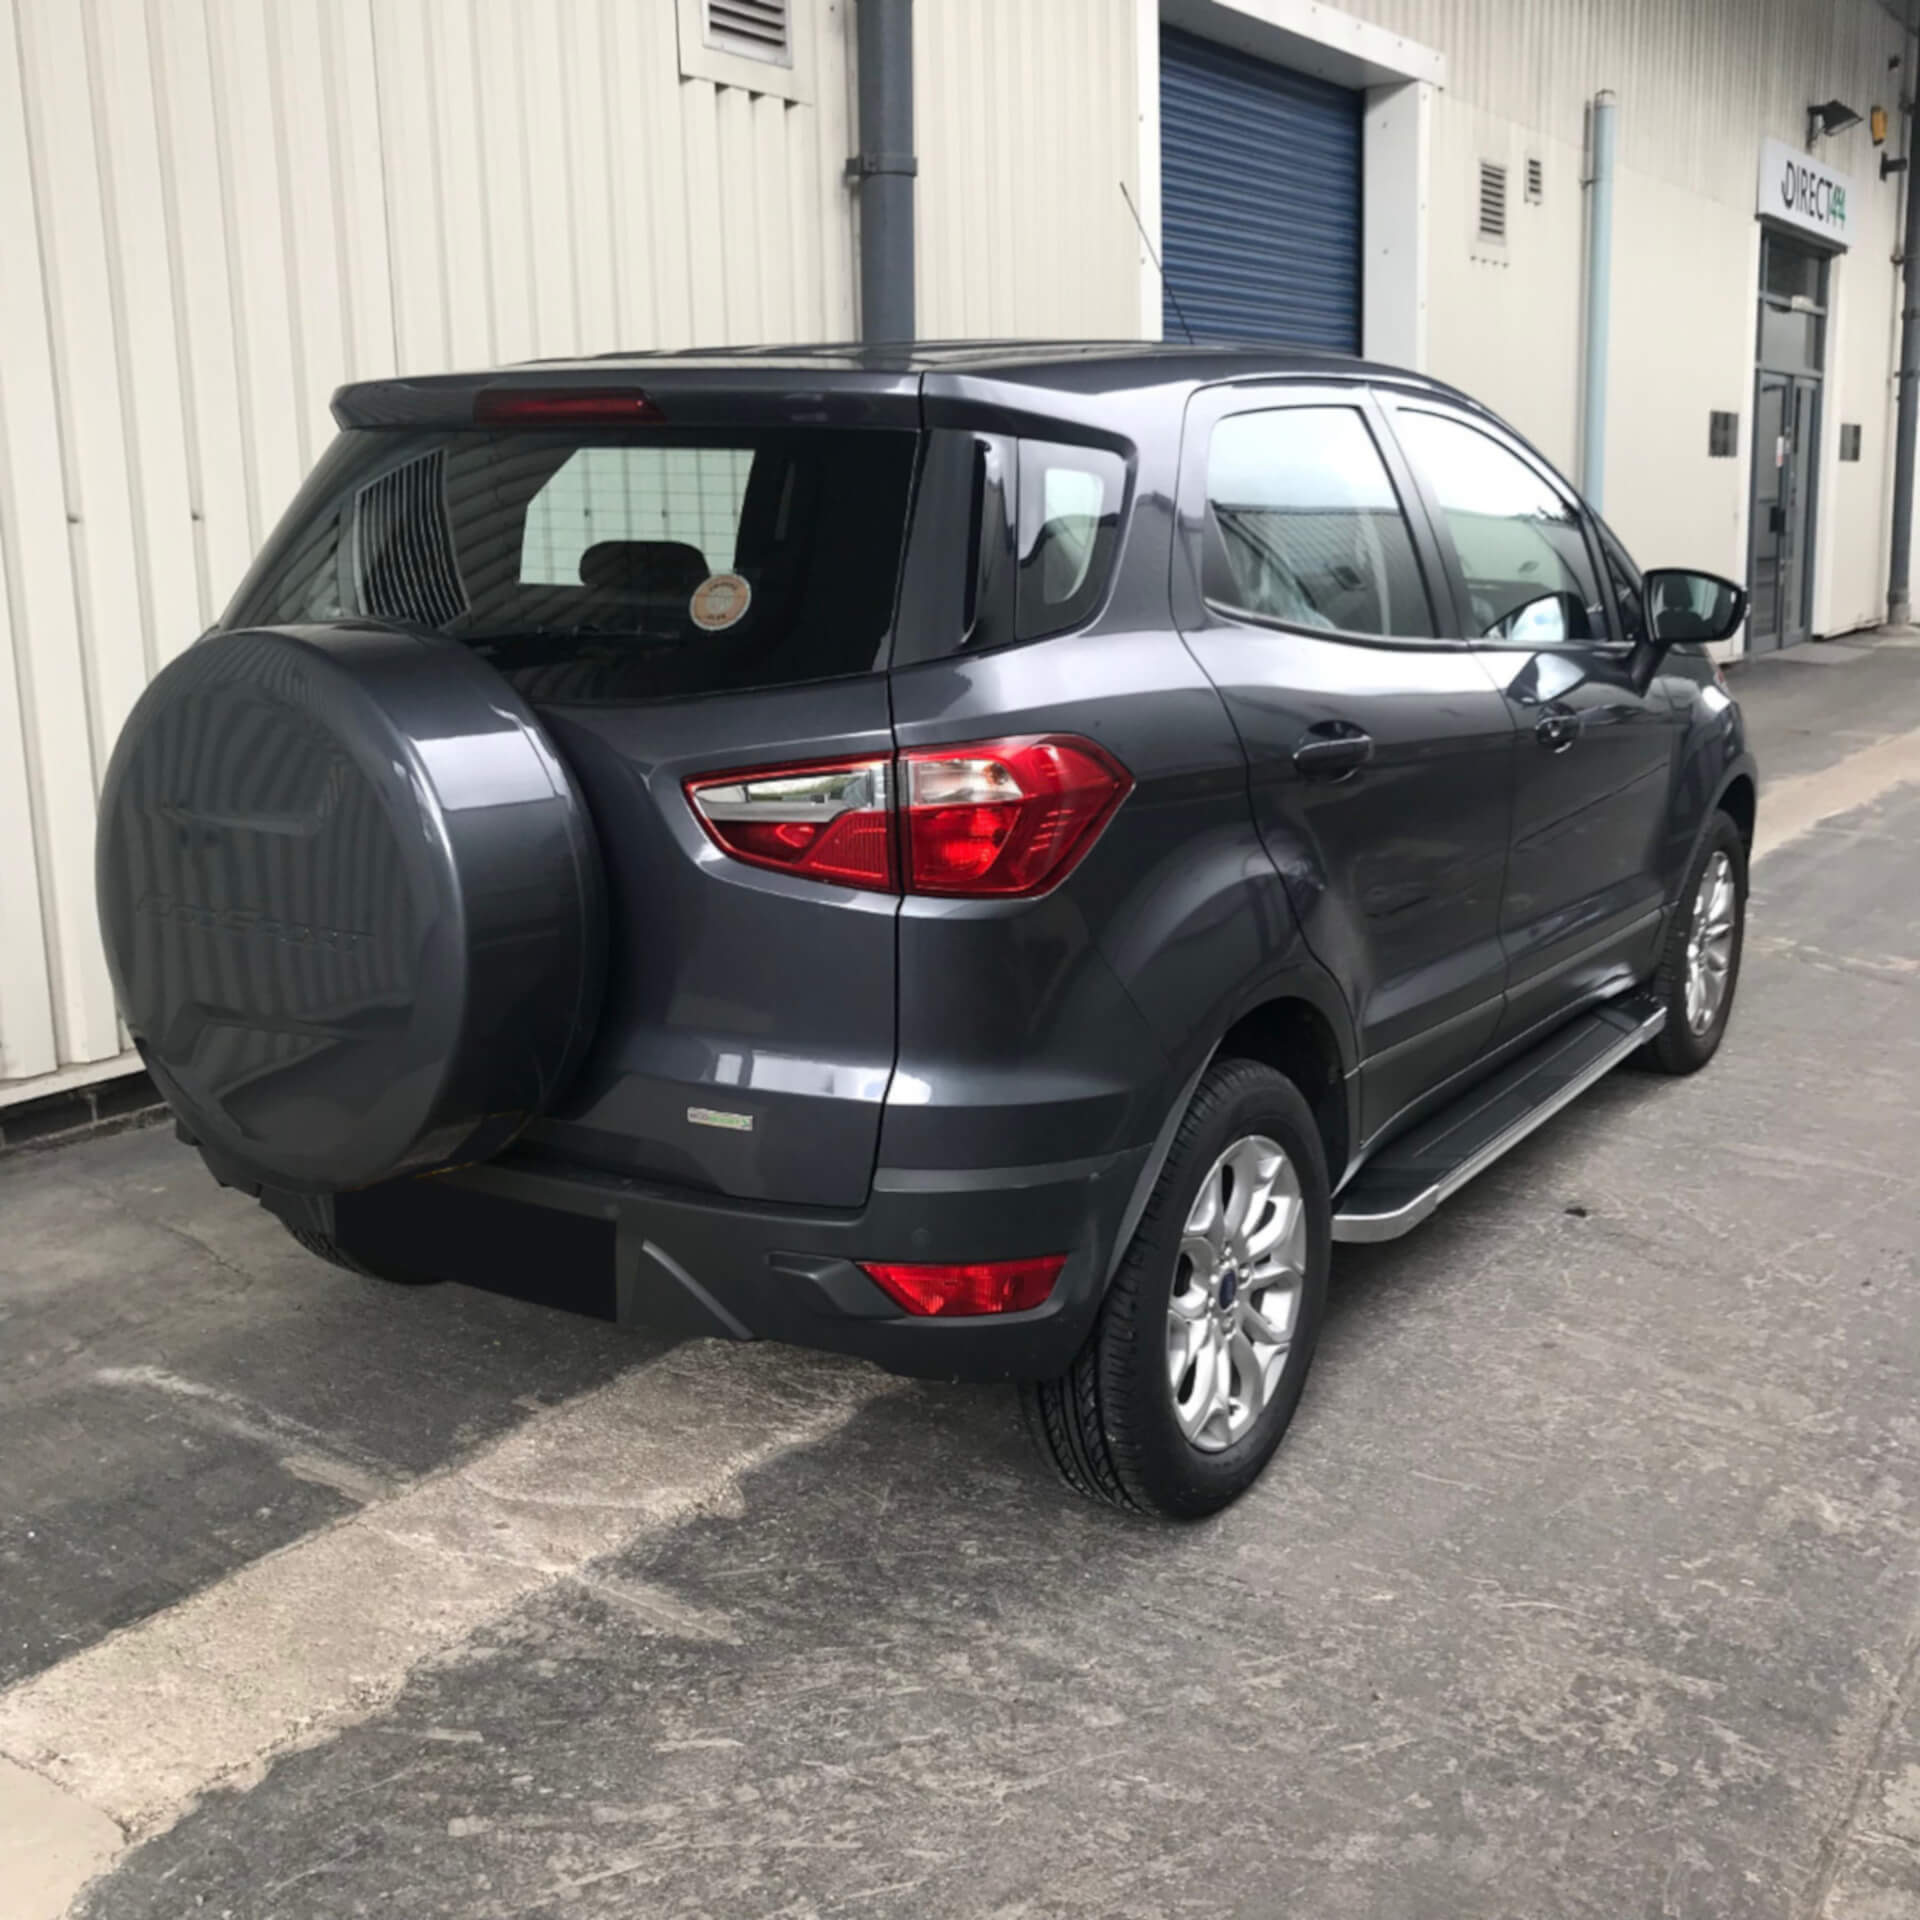 Direct4x4 accessories for Ford Ecosport vehicles with a photo the back of a dark grey Ford Ecosport outside our depot